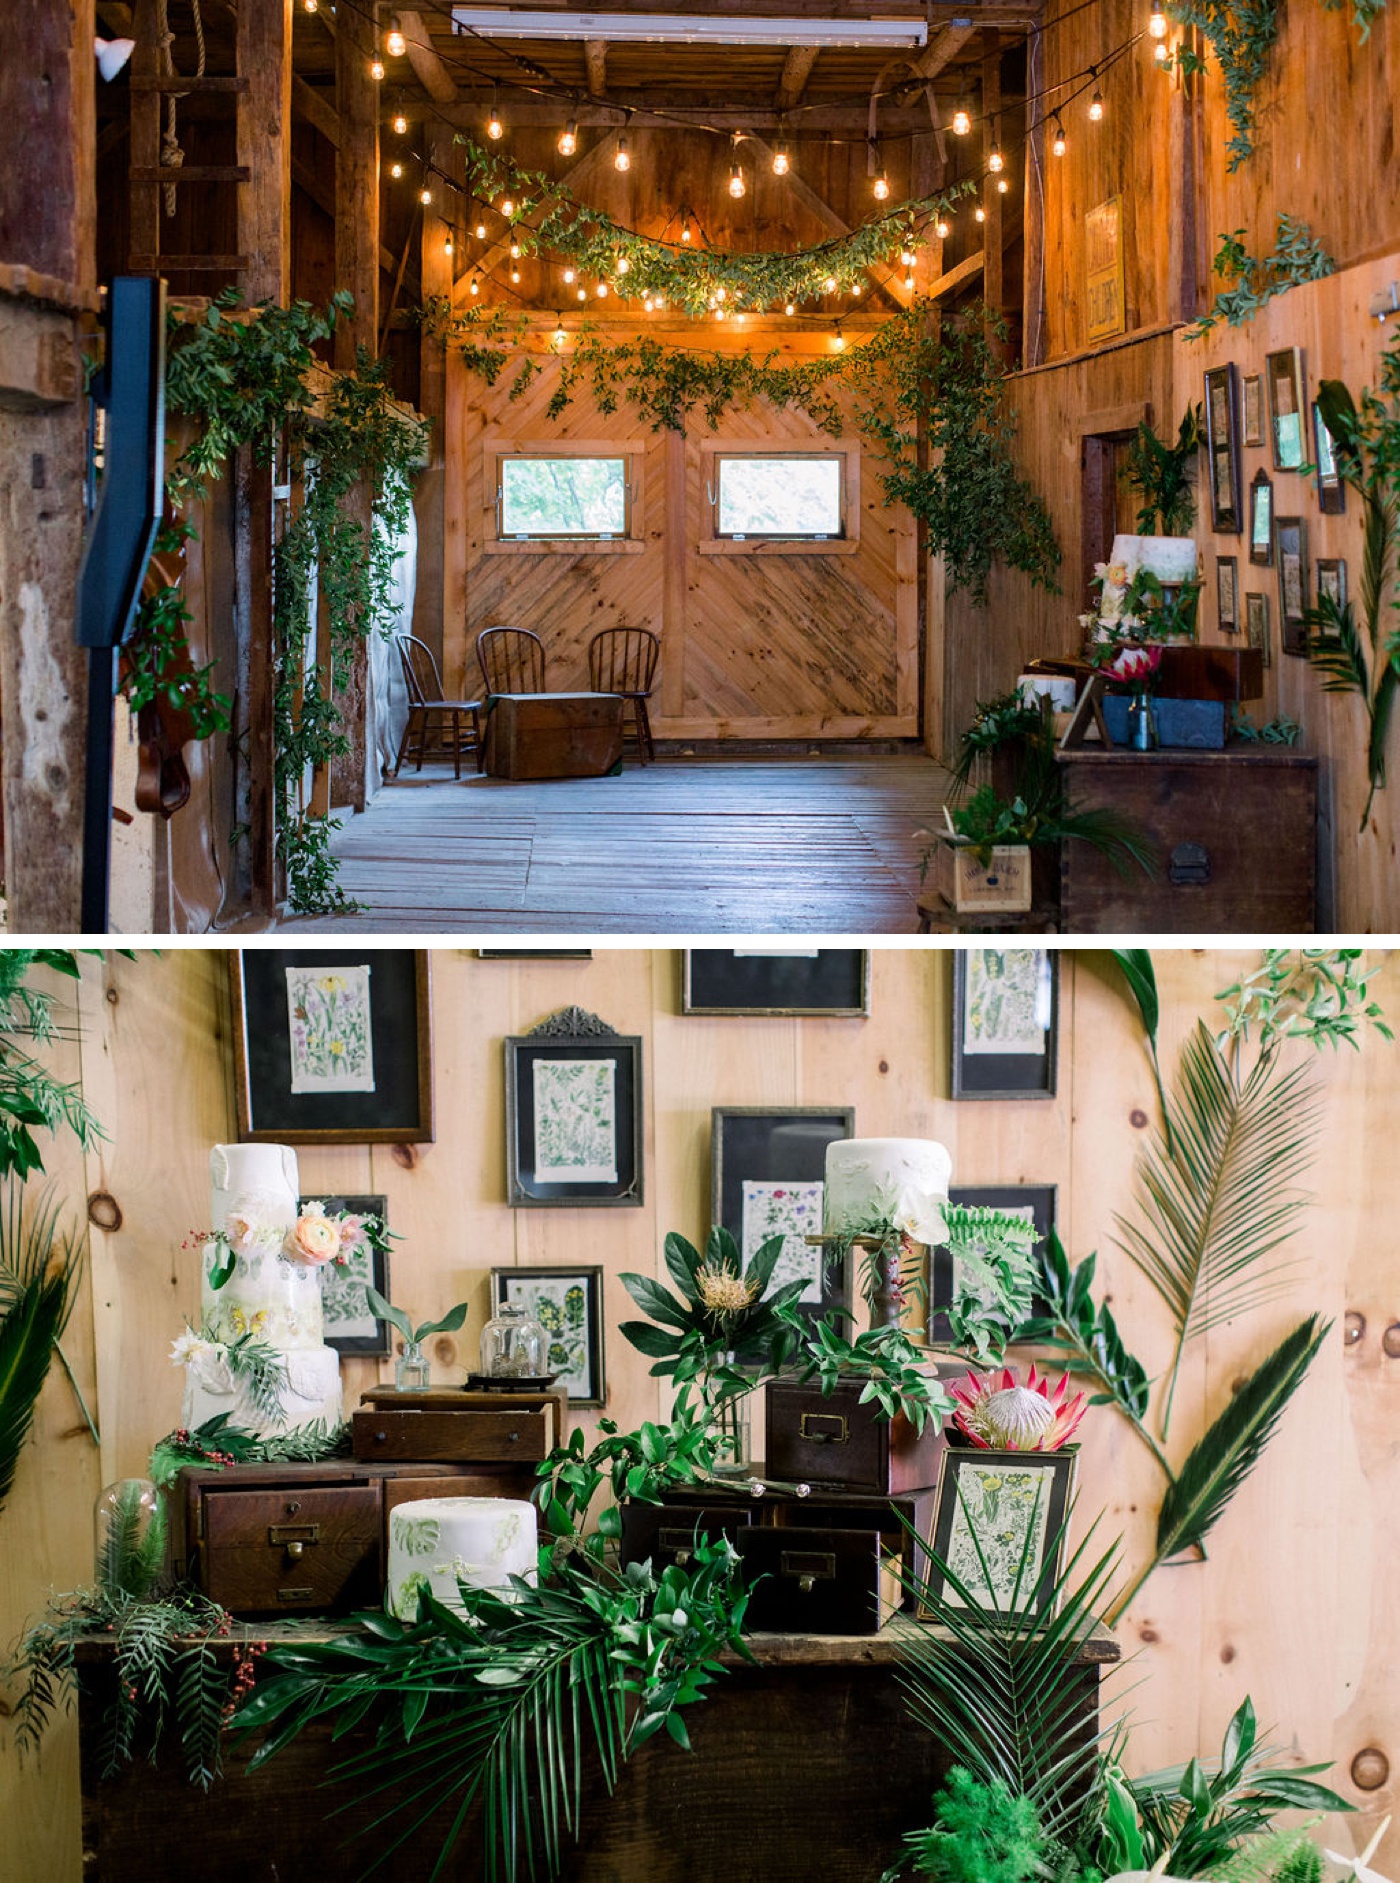 Antique sideboard with tropical greenery and a gallery wall of vintage picture frames at a nature-themed wedding